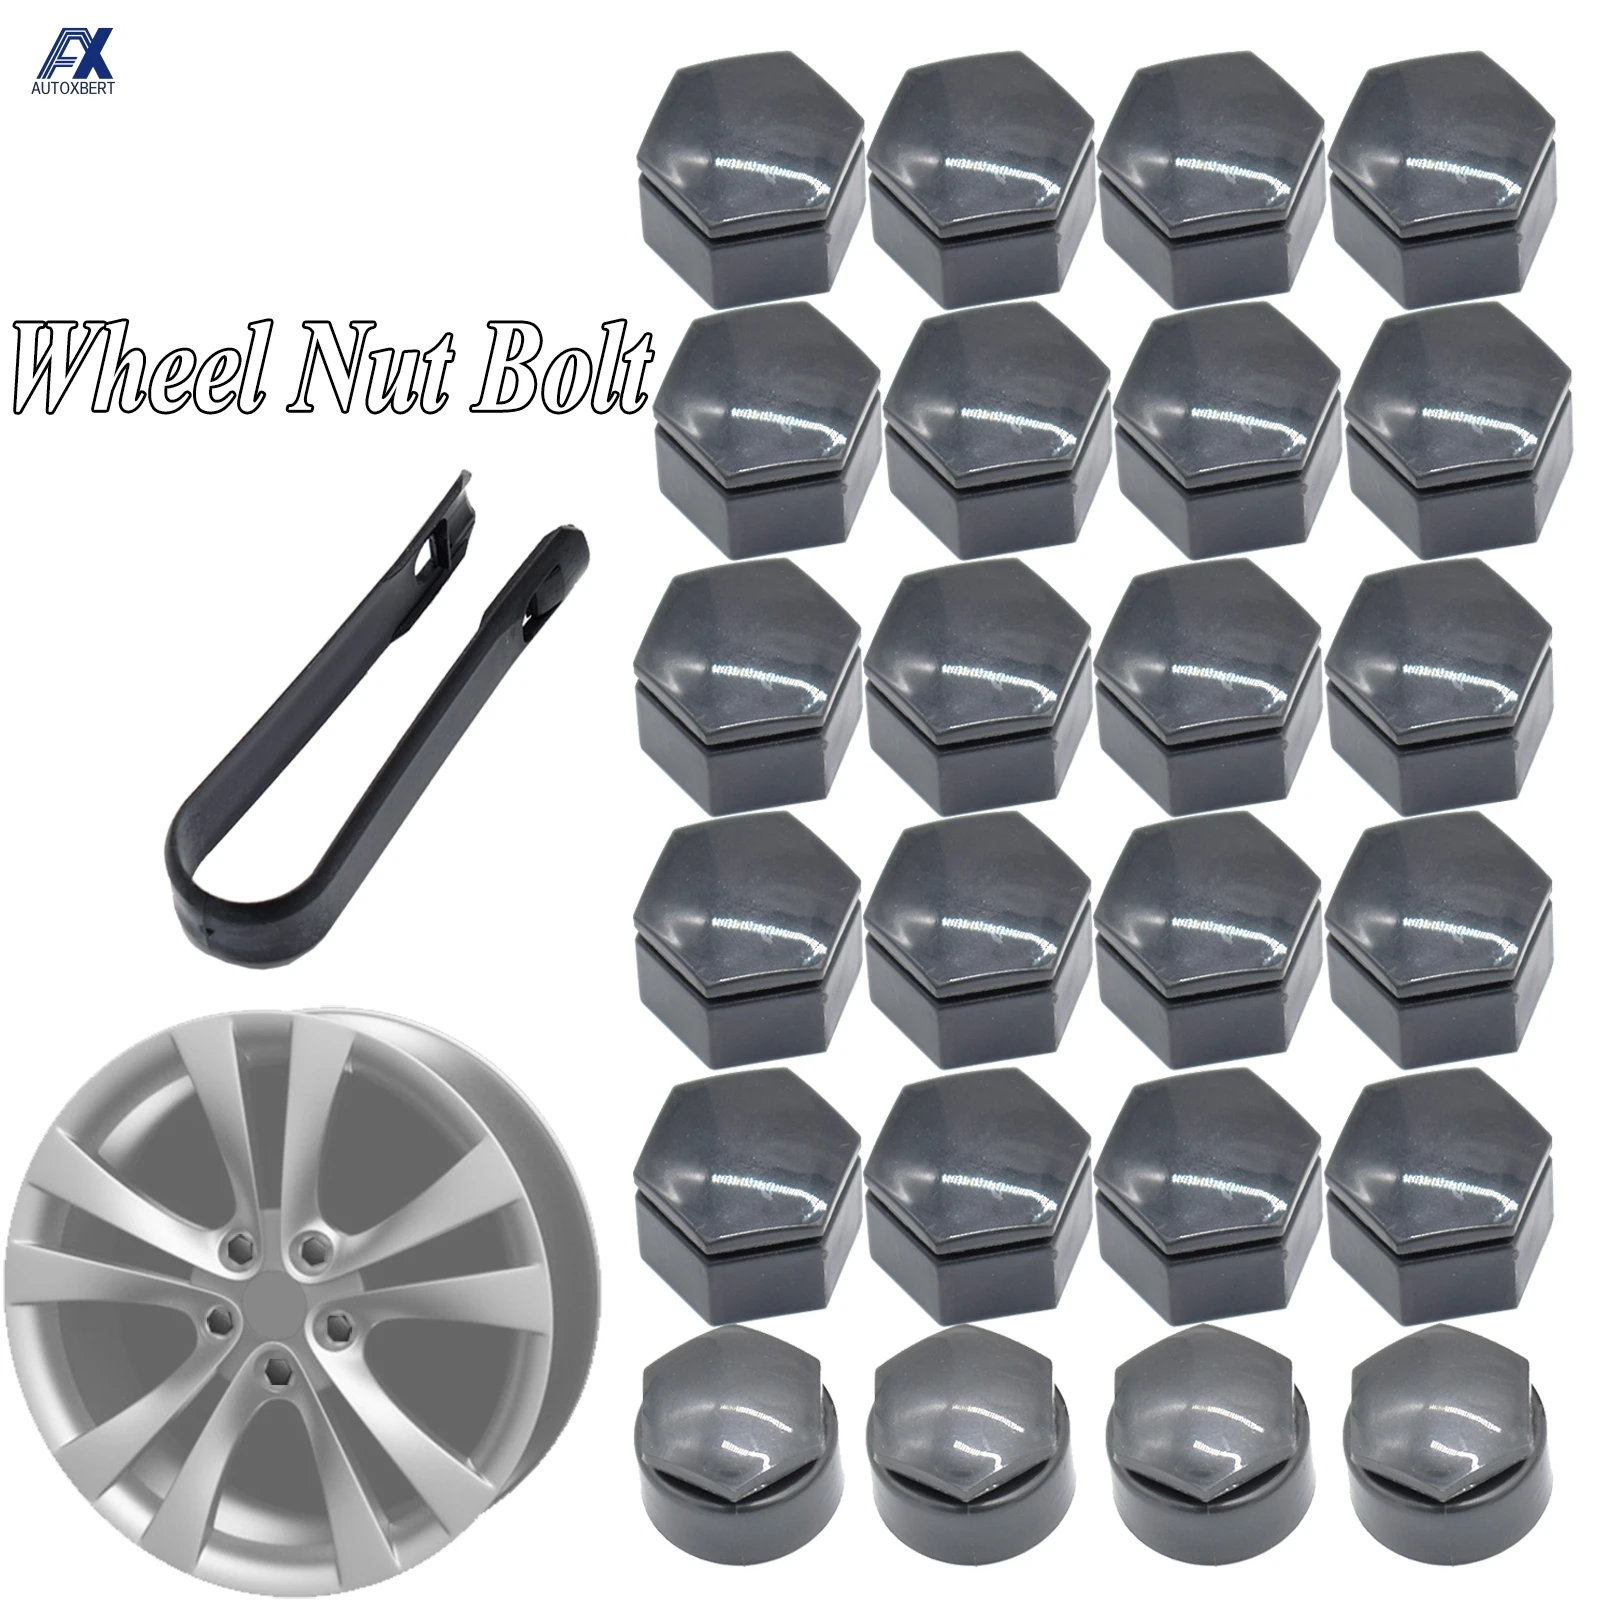 24pc Grey Wheel Center Nut Bolt Tire Screw Cap Dust Water Proof Cover With Tool 22mm For Opel Vauxhall Holden Insignia 2010 - 17